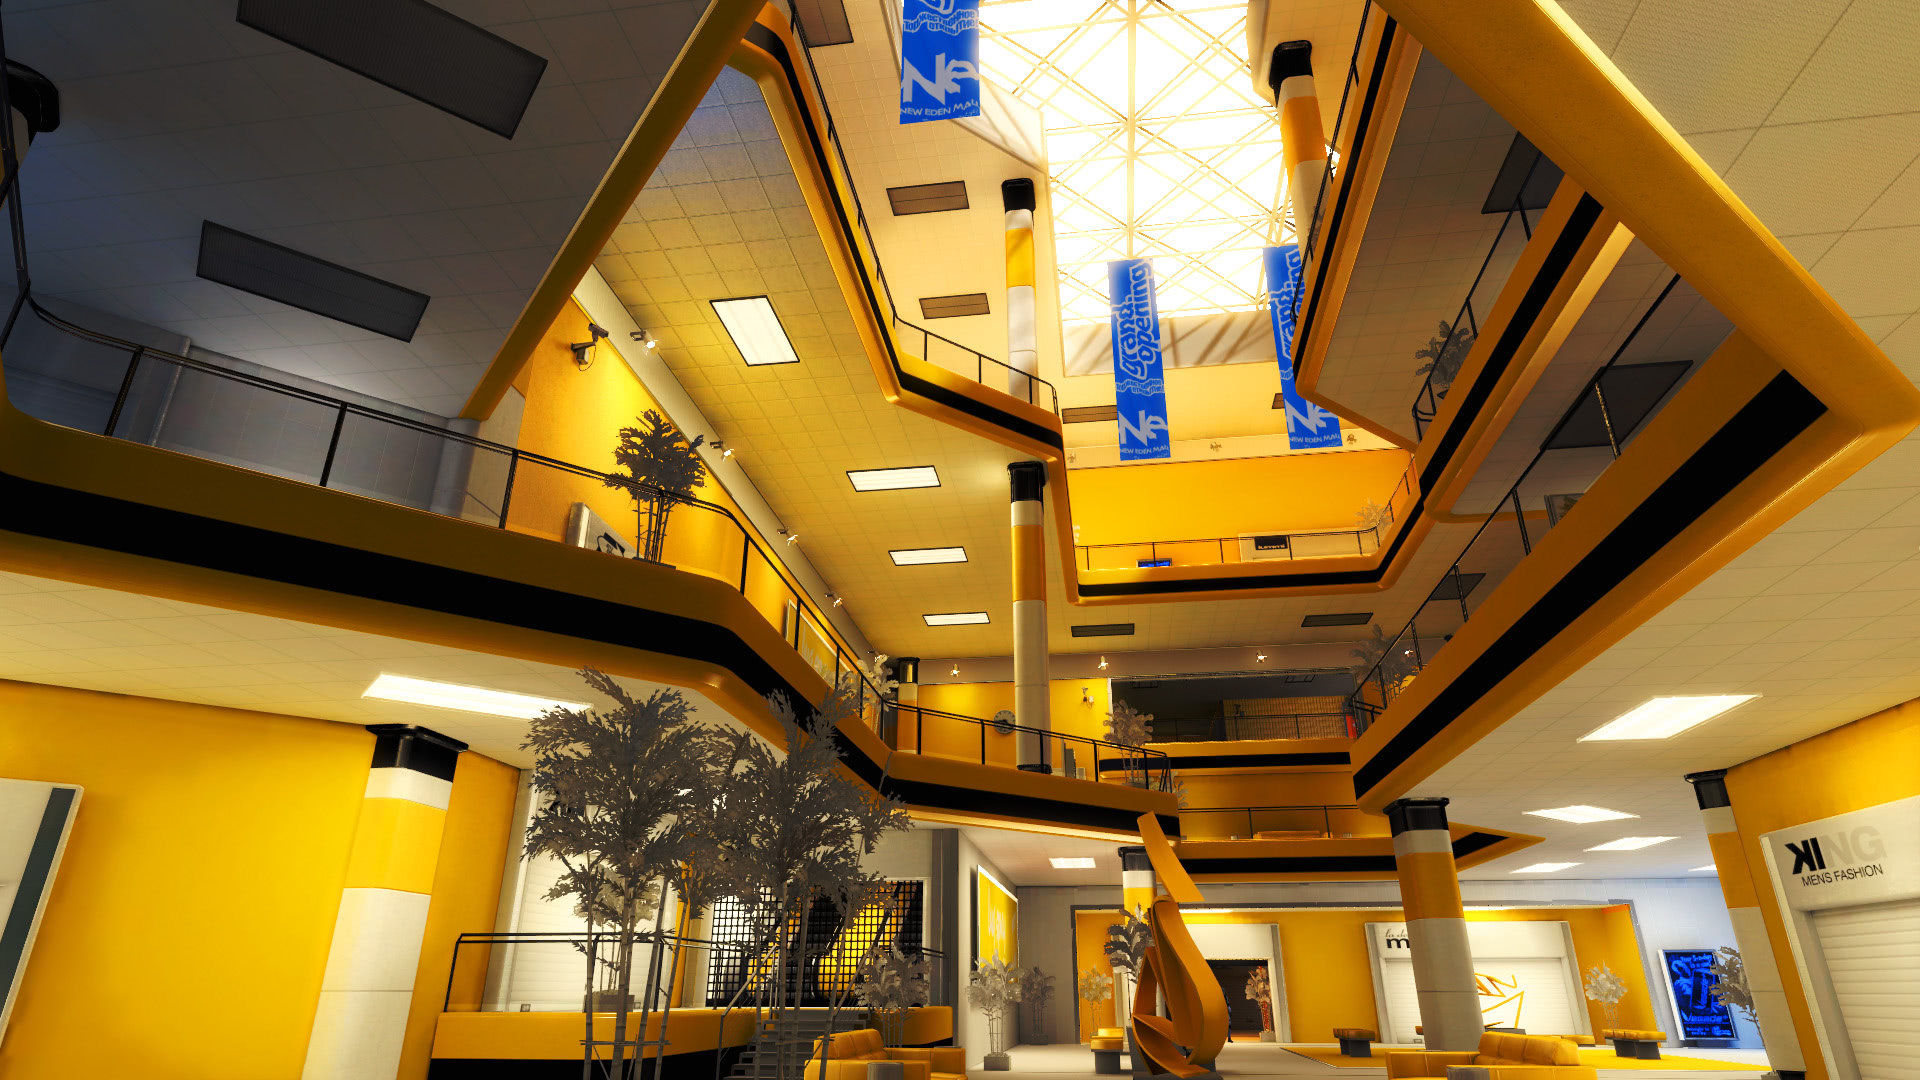 General 1920x1080 Mirror's Edge shopping video games architecture yellow PC gaming CGI